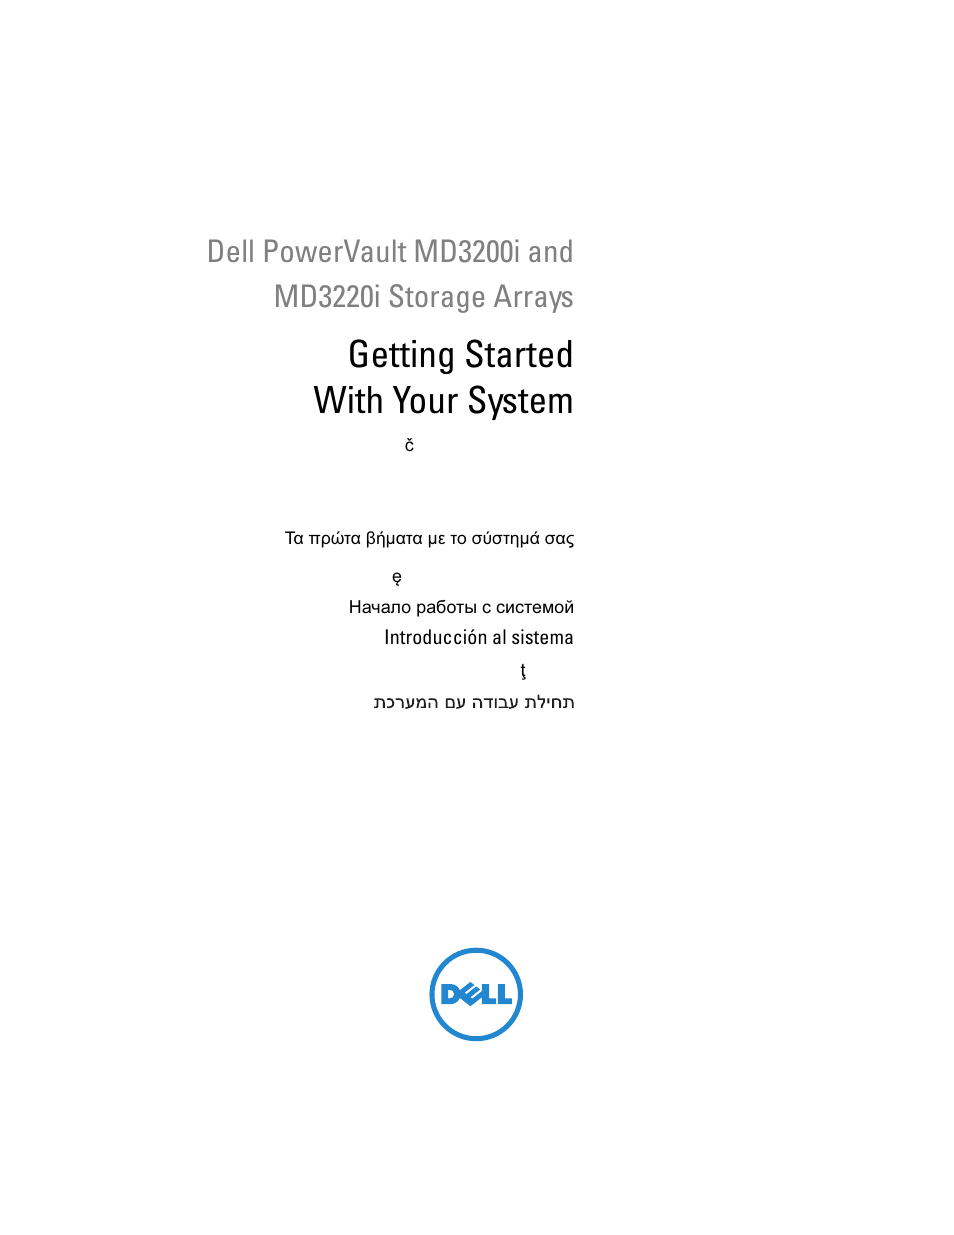 Dell PowerVault MD3200i User Manual | 222 pages